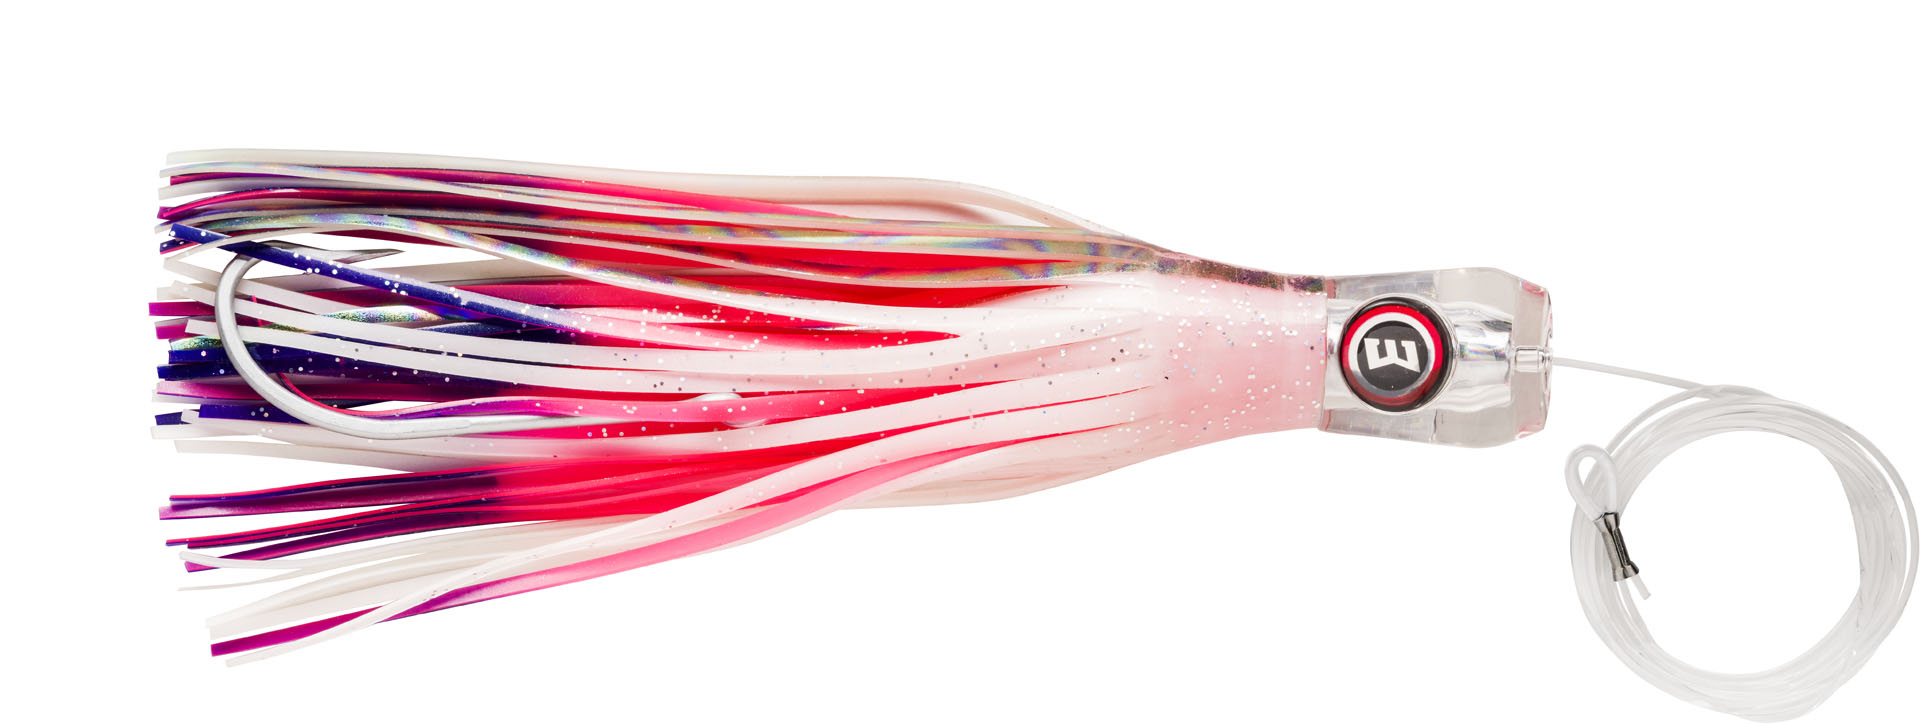 Williamson Big Game Catcher Sea Fish Rig 21cm (100g) - Candy Floss